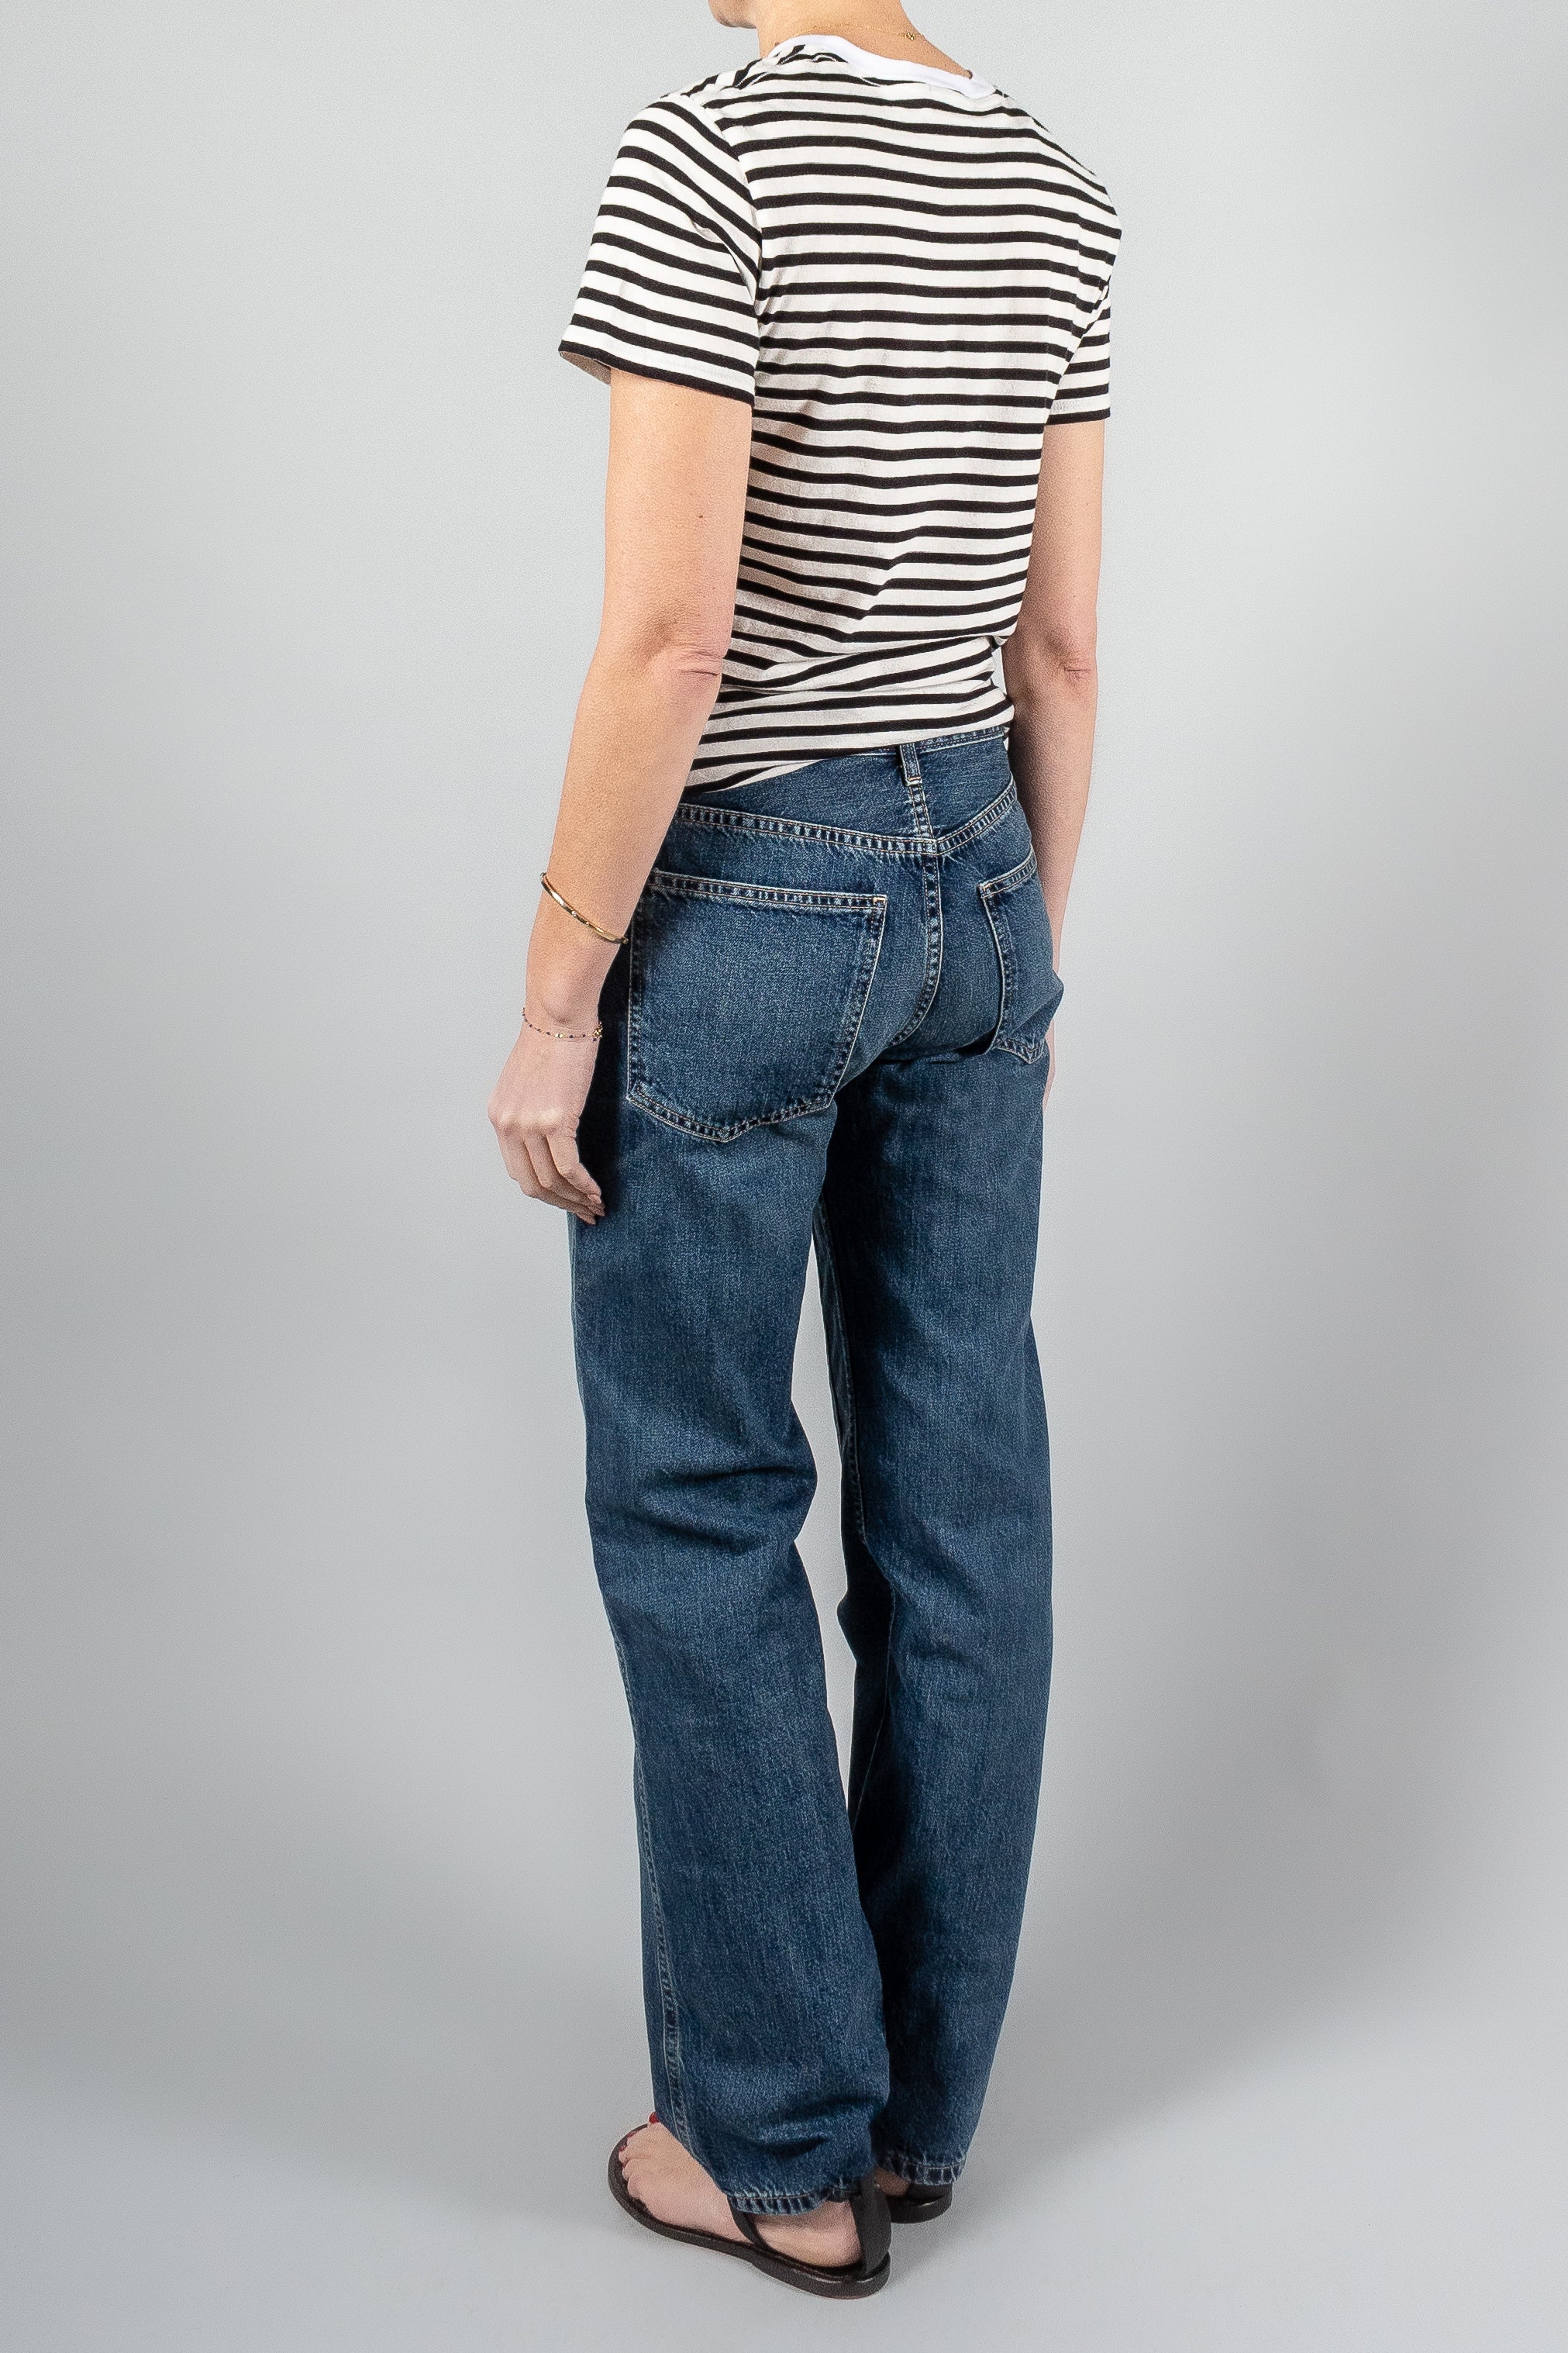 Nili Lotan Welder Jean-Pants and Shorts-Misch-Boutique-Vancouver-Canada-misch.ca